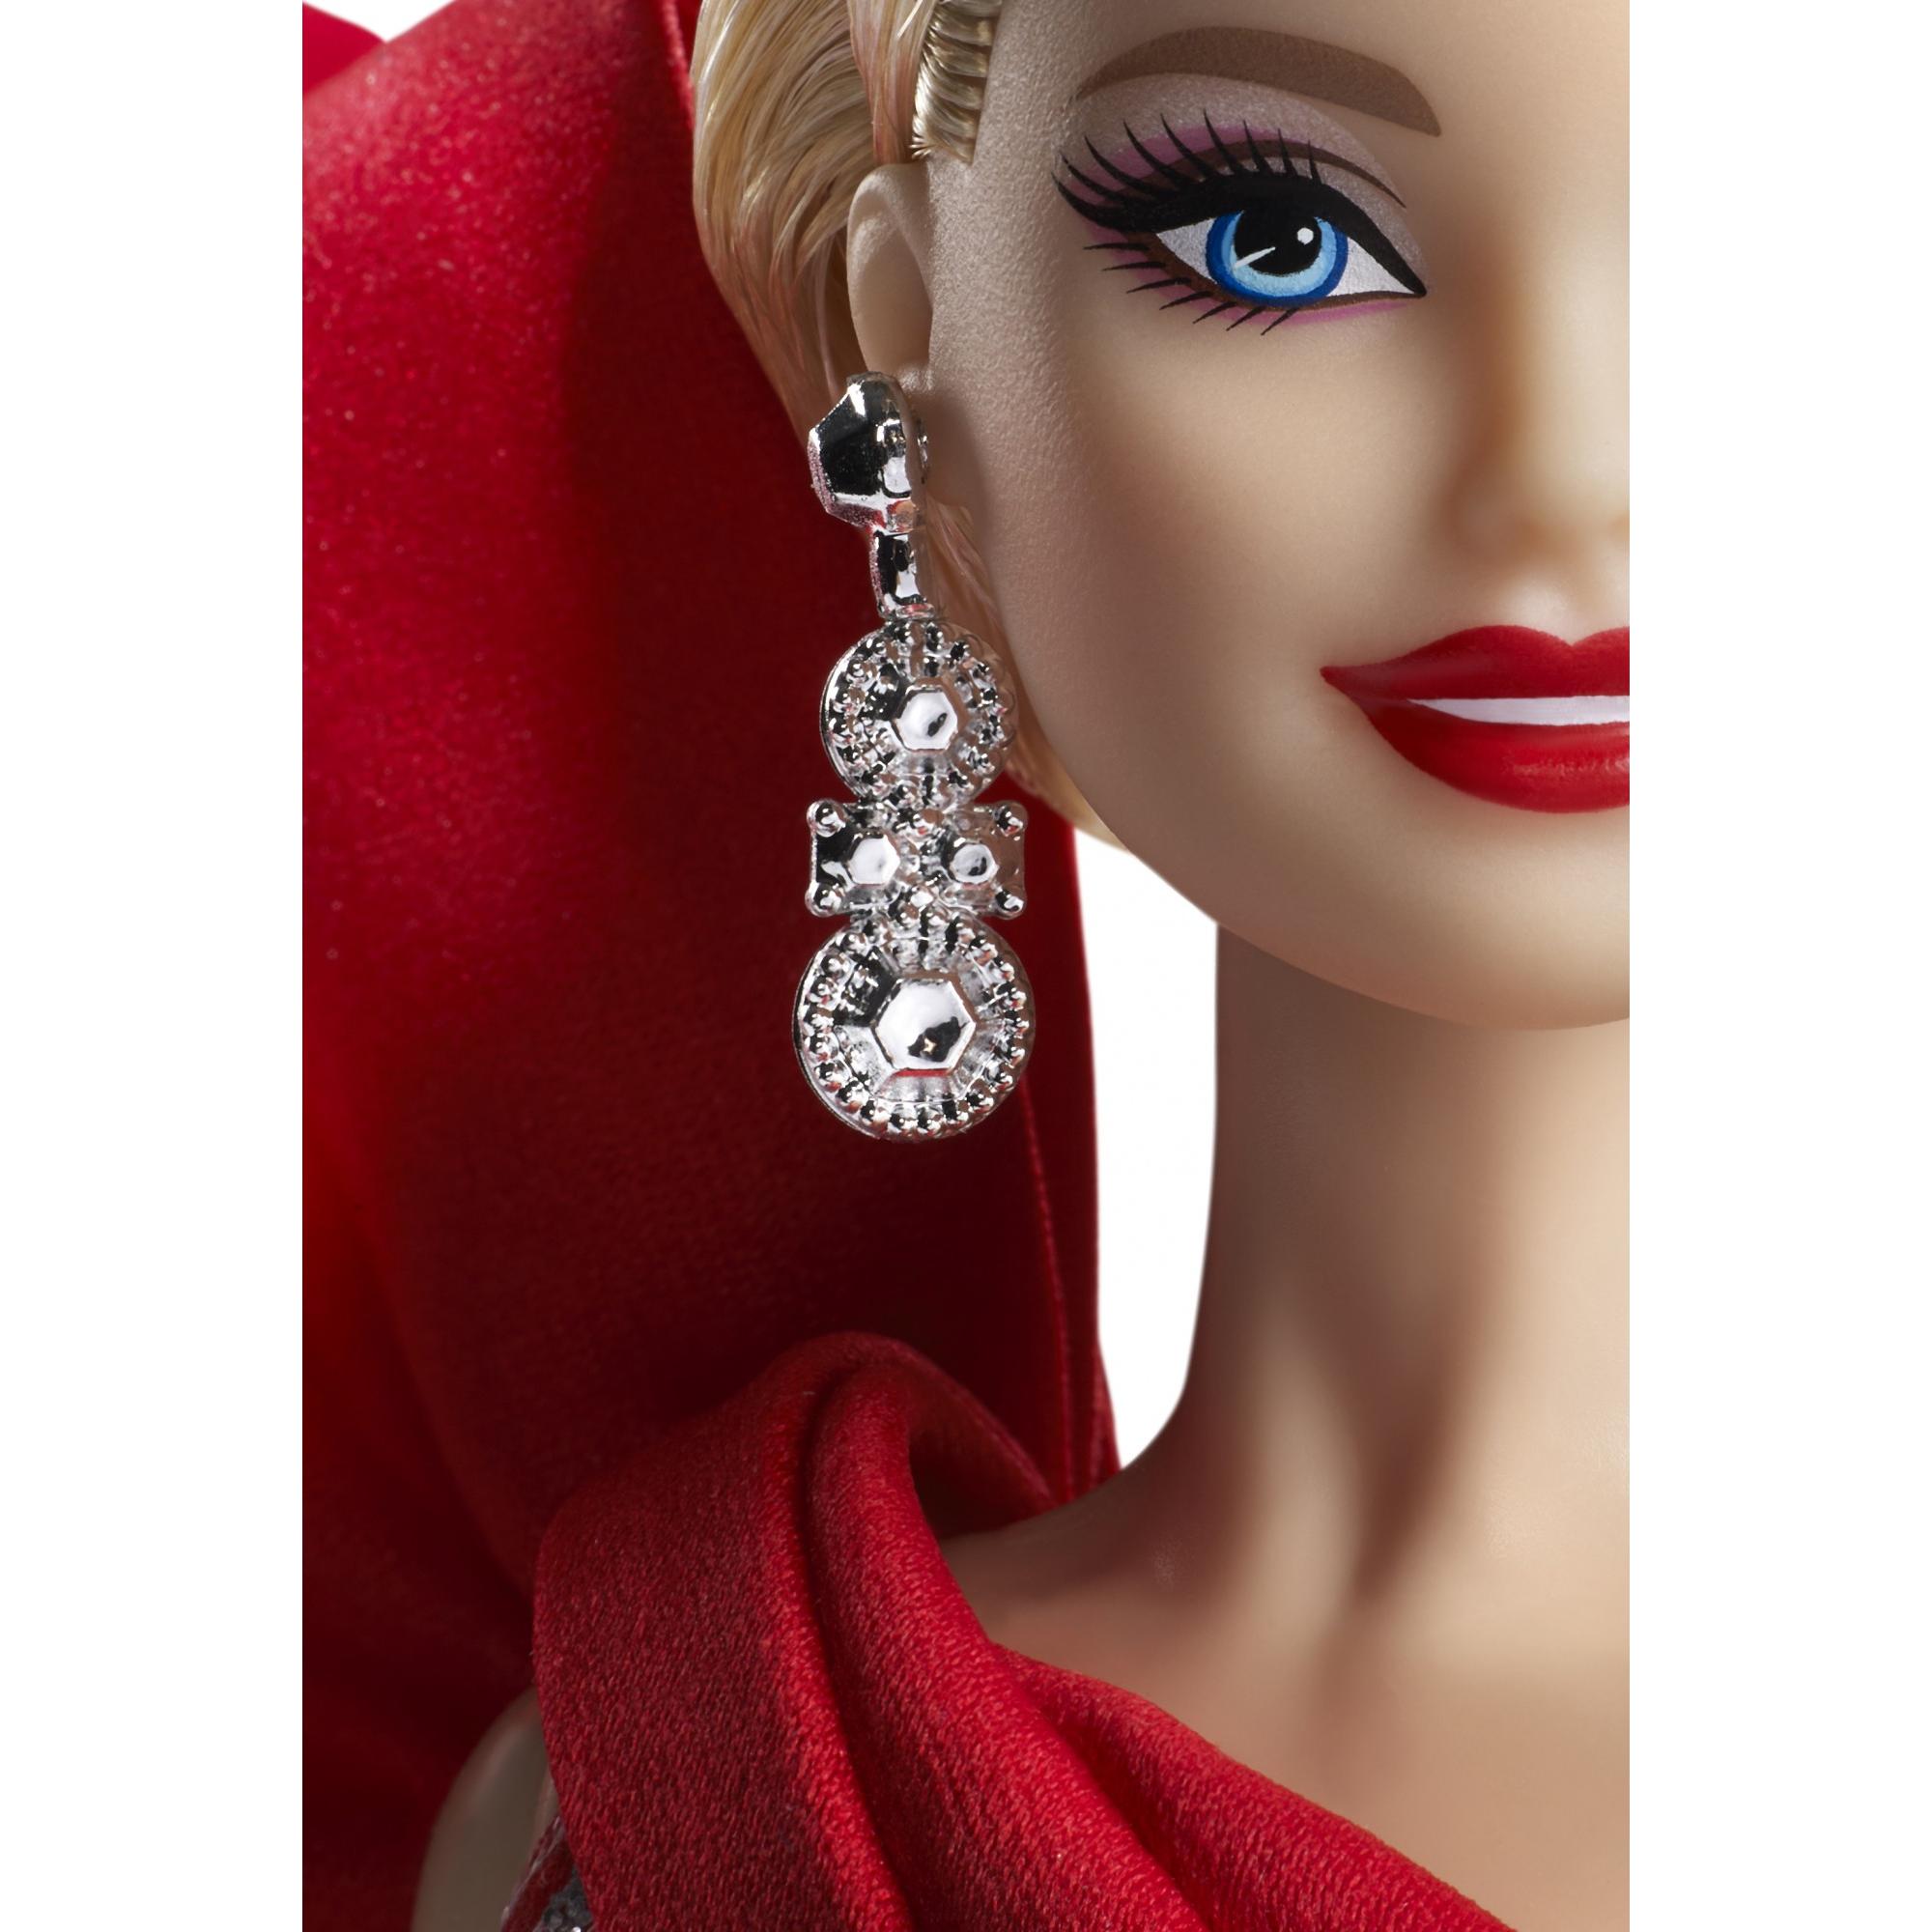 Barbie 2019 Holiday Doll, Blonde Curls with Red & White Gown - image 4 of 10